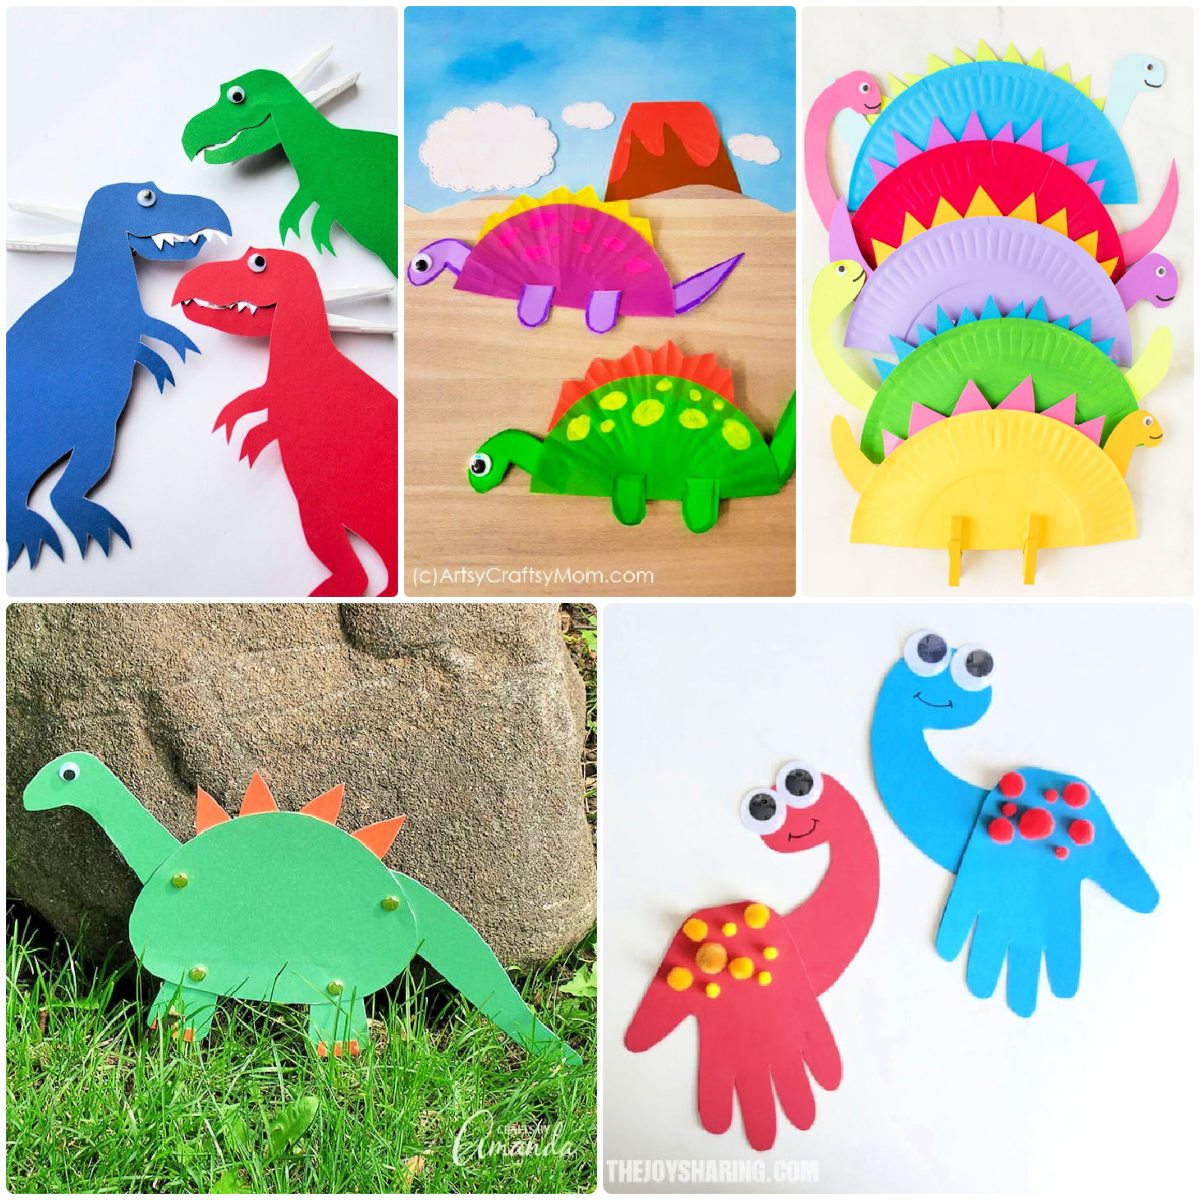 dinosaurs drawing for kids